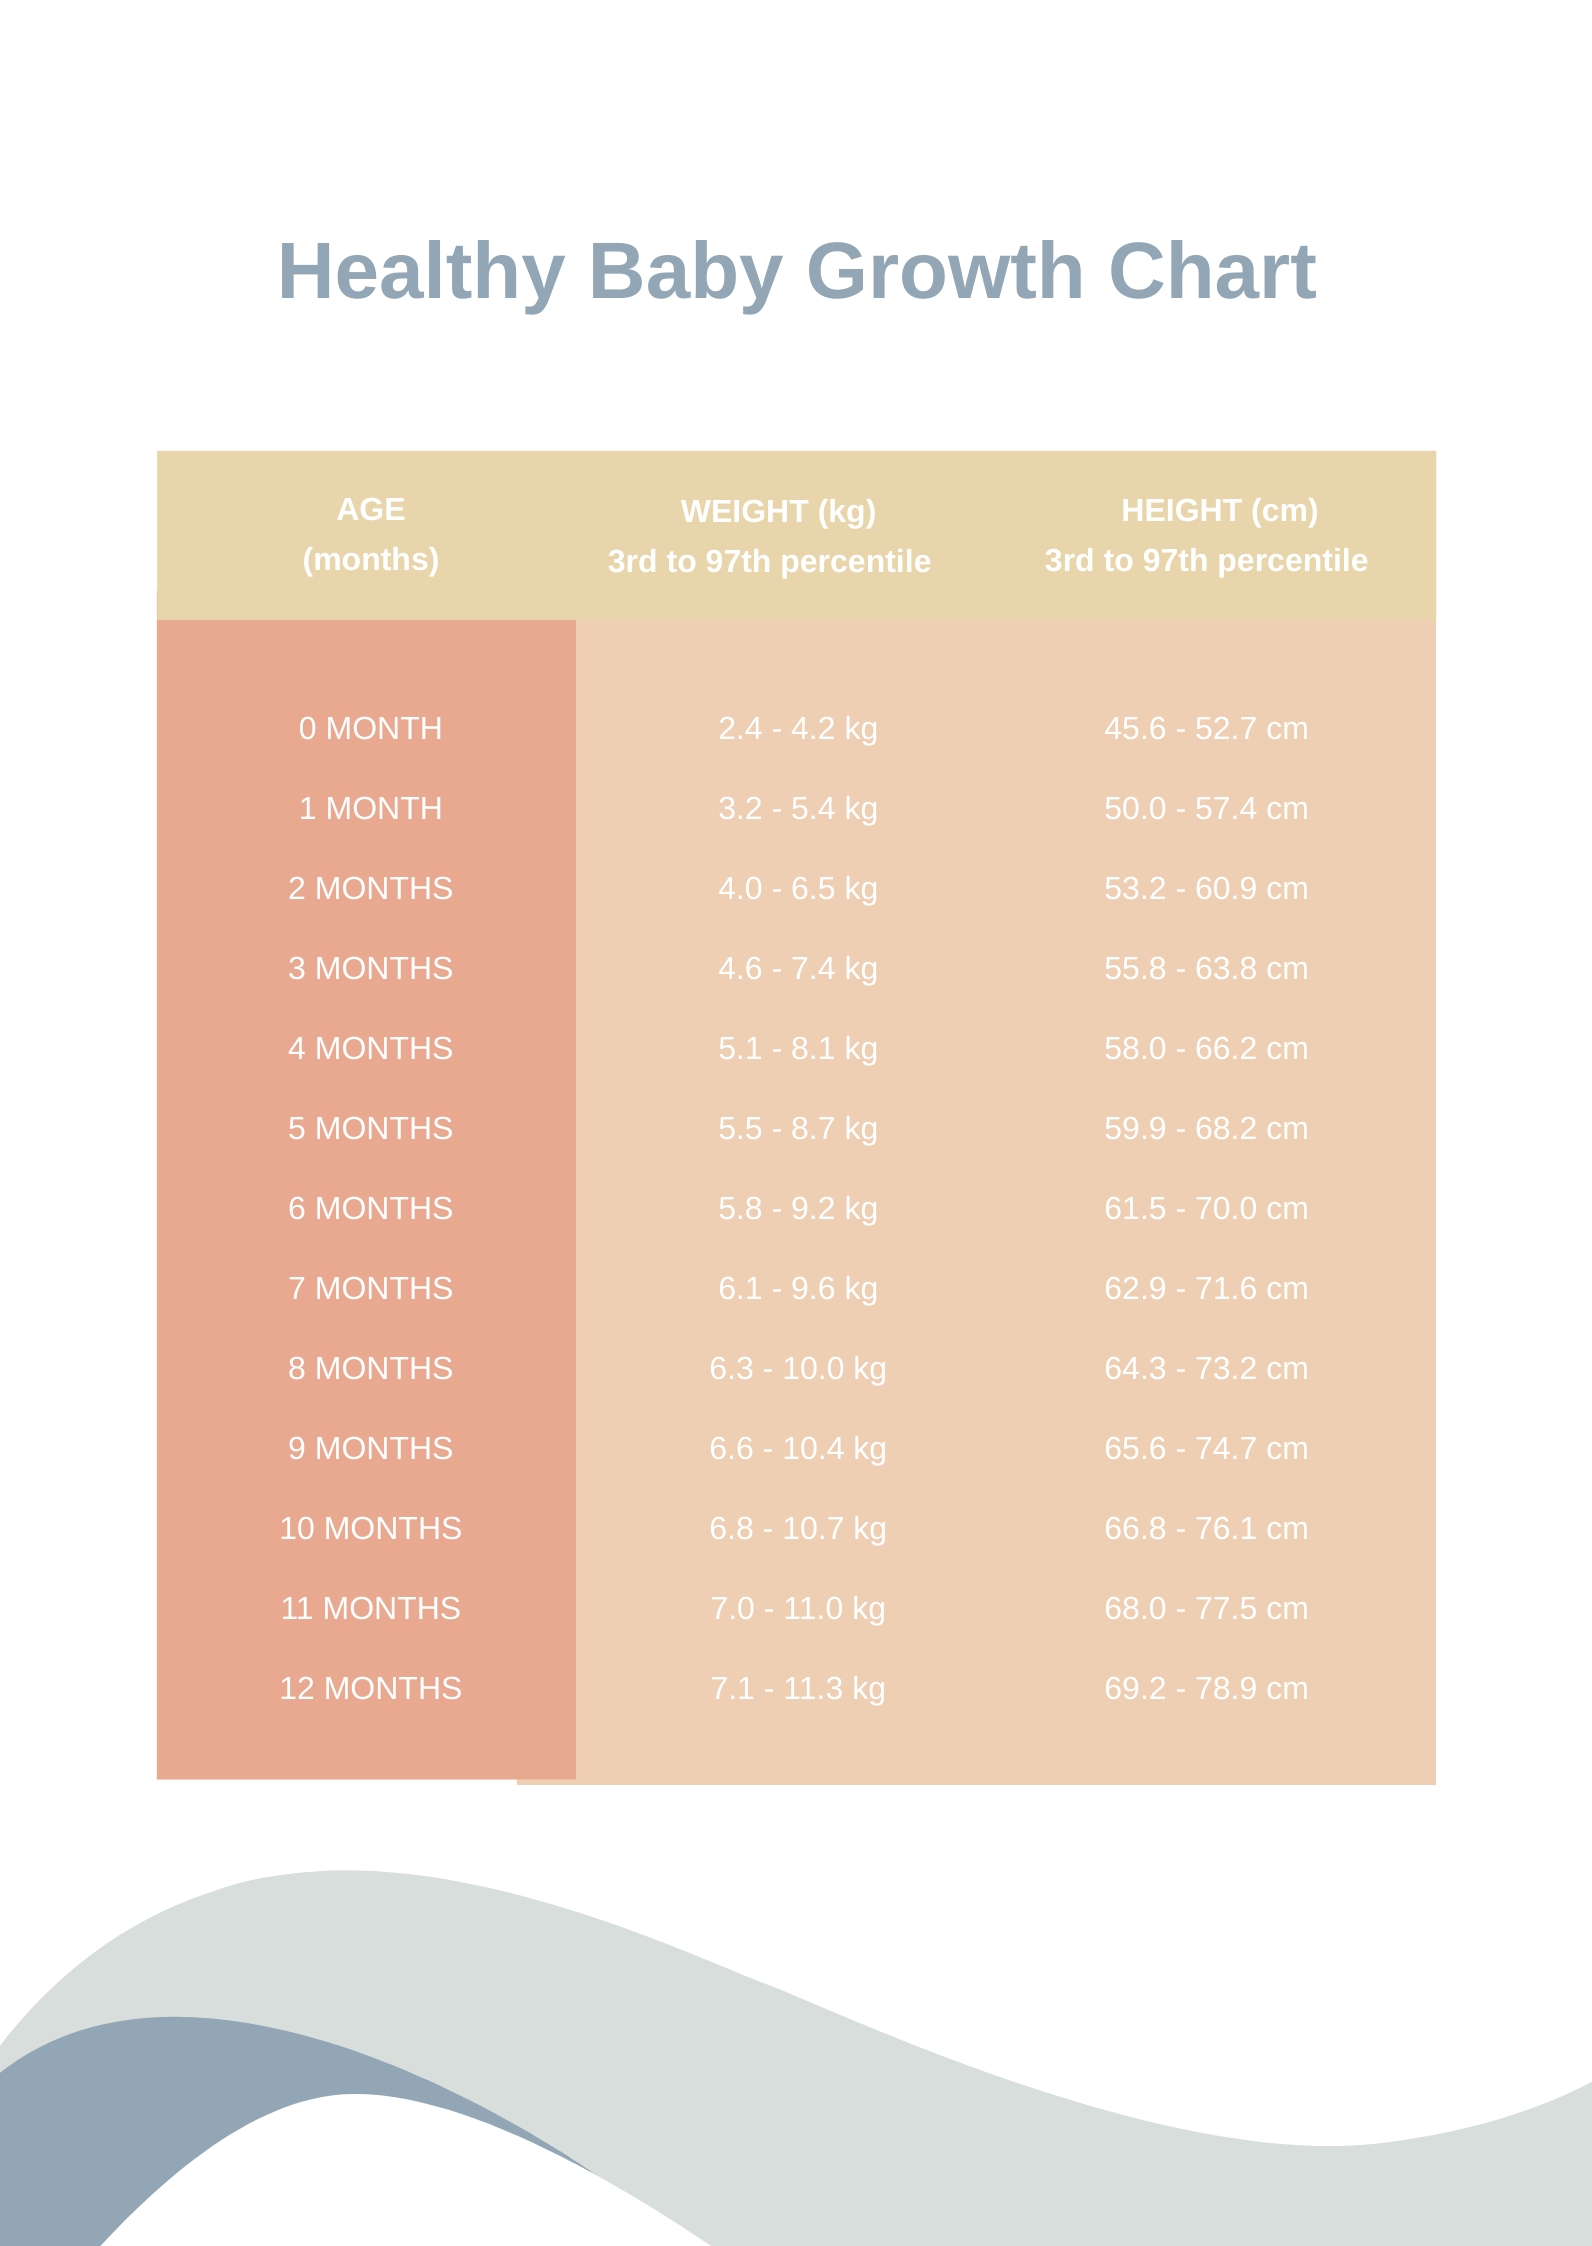 FREE Baby Growth Chart Template - Download in PDF | Template.net